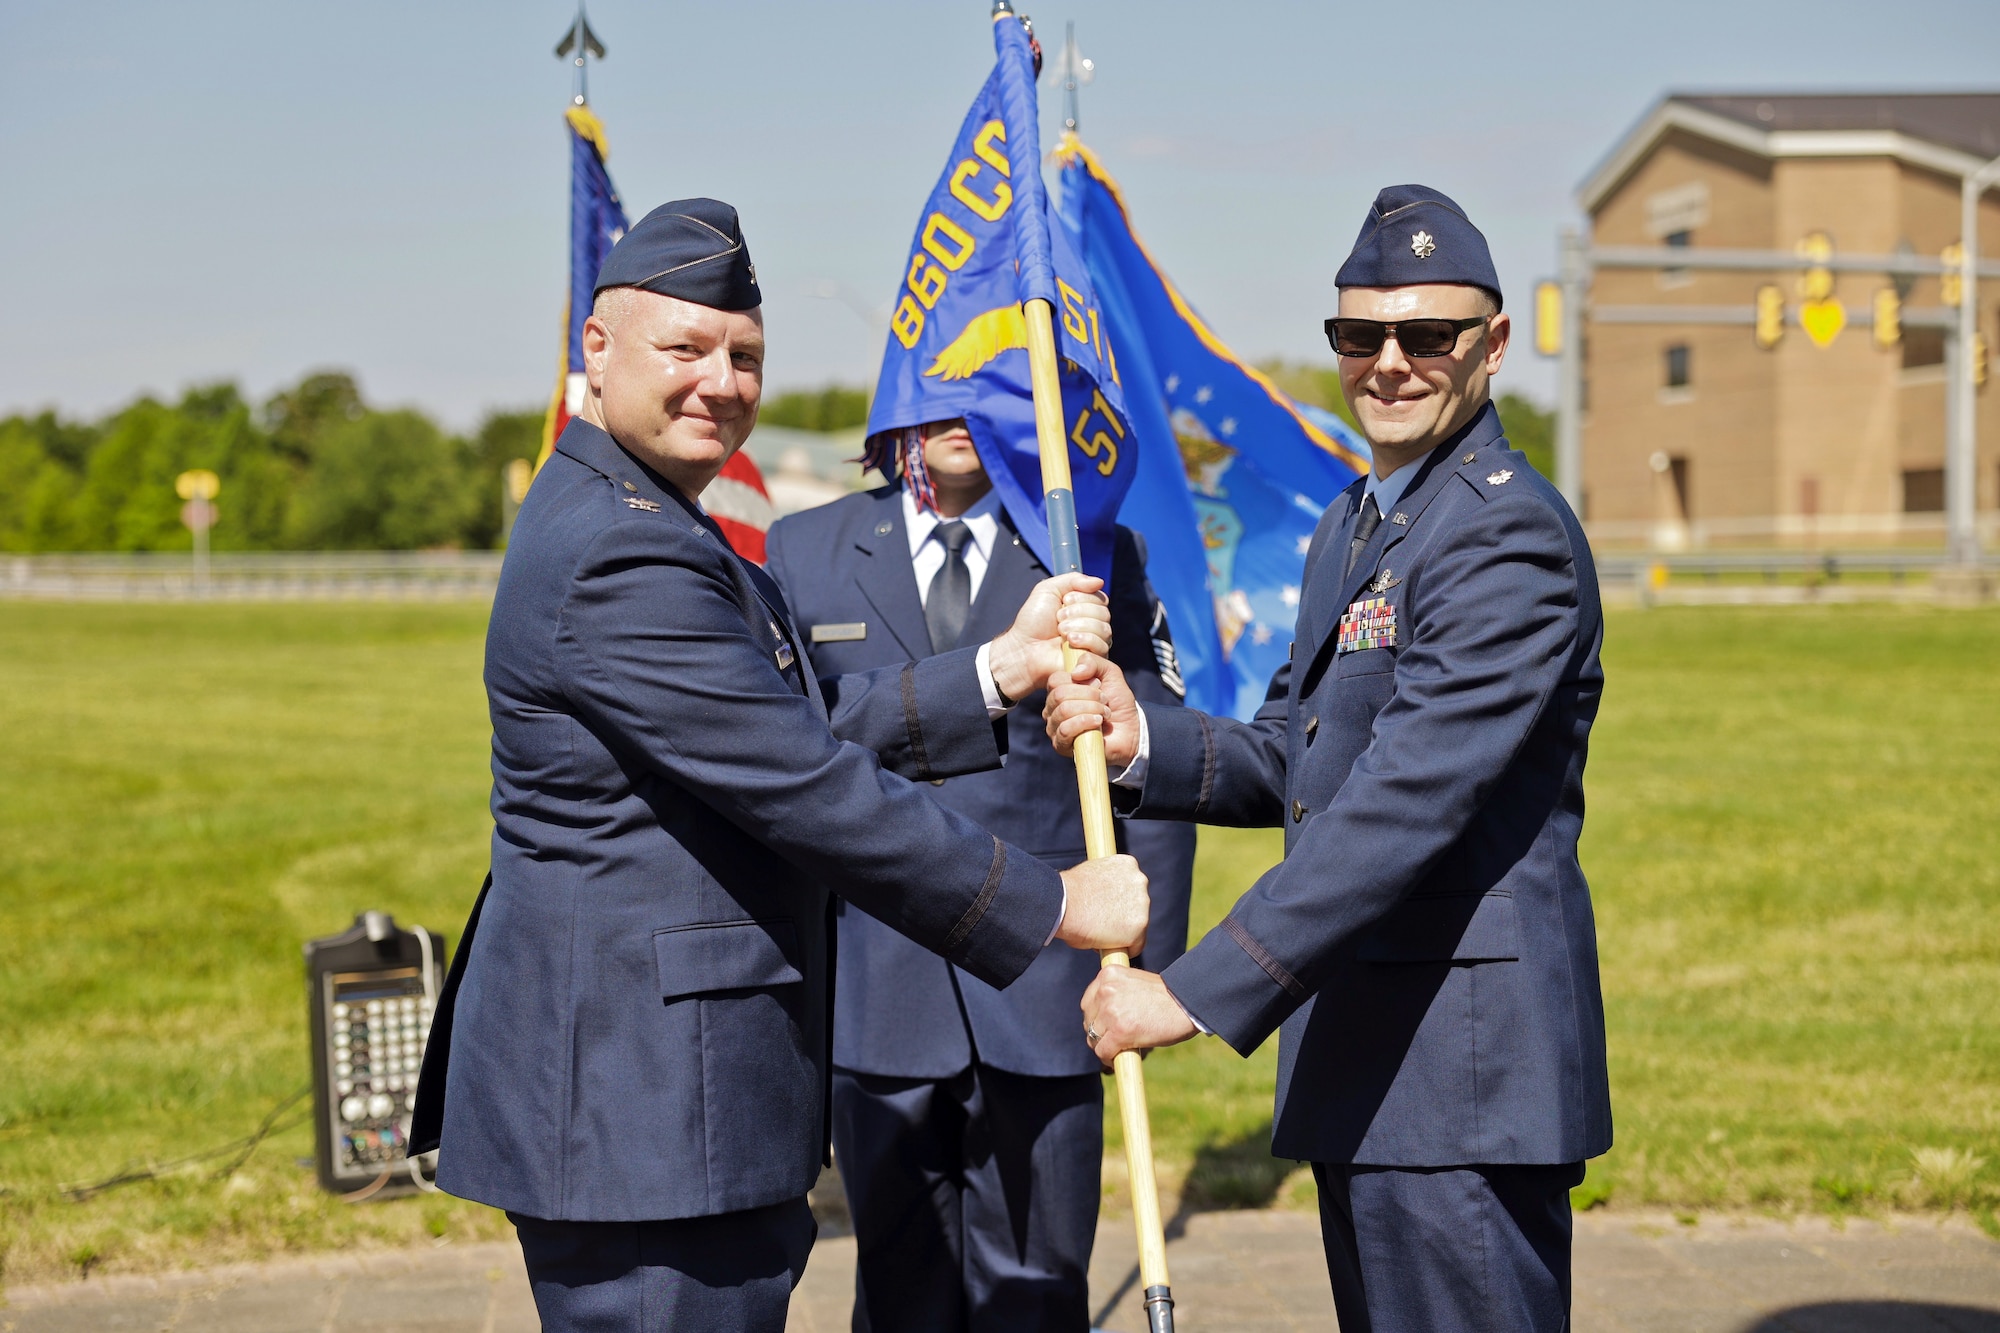 Col. Thaddeus Janicki Jr., 860th Cyberspace Operations Group commander, passes the 51st Network Operations Squadron guidon to Lt. Col. Ernest Moore, signifying his assumption of command of the squadron June 11, 2022, at Joint Base Langley-Eustis, Virginia. The 51st NOS is a geographically separated unit of the 860th COG, located at Robins Air Force Base, Georgia. (Courtesy photo)